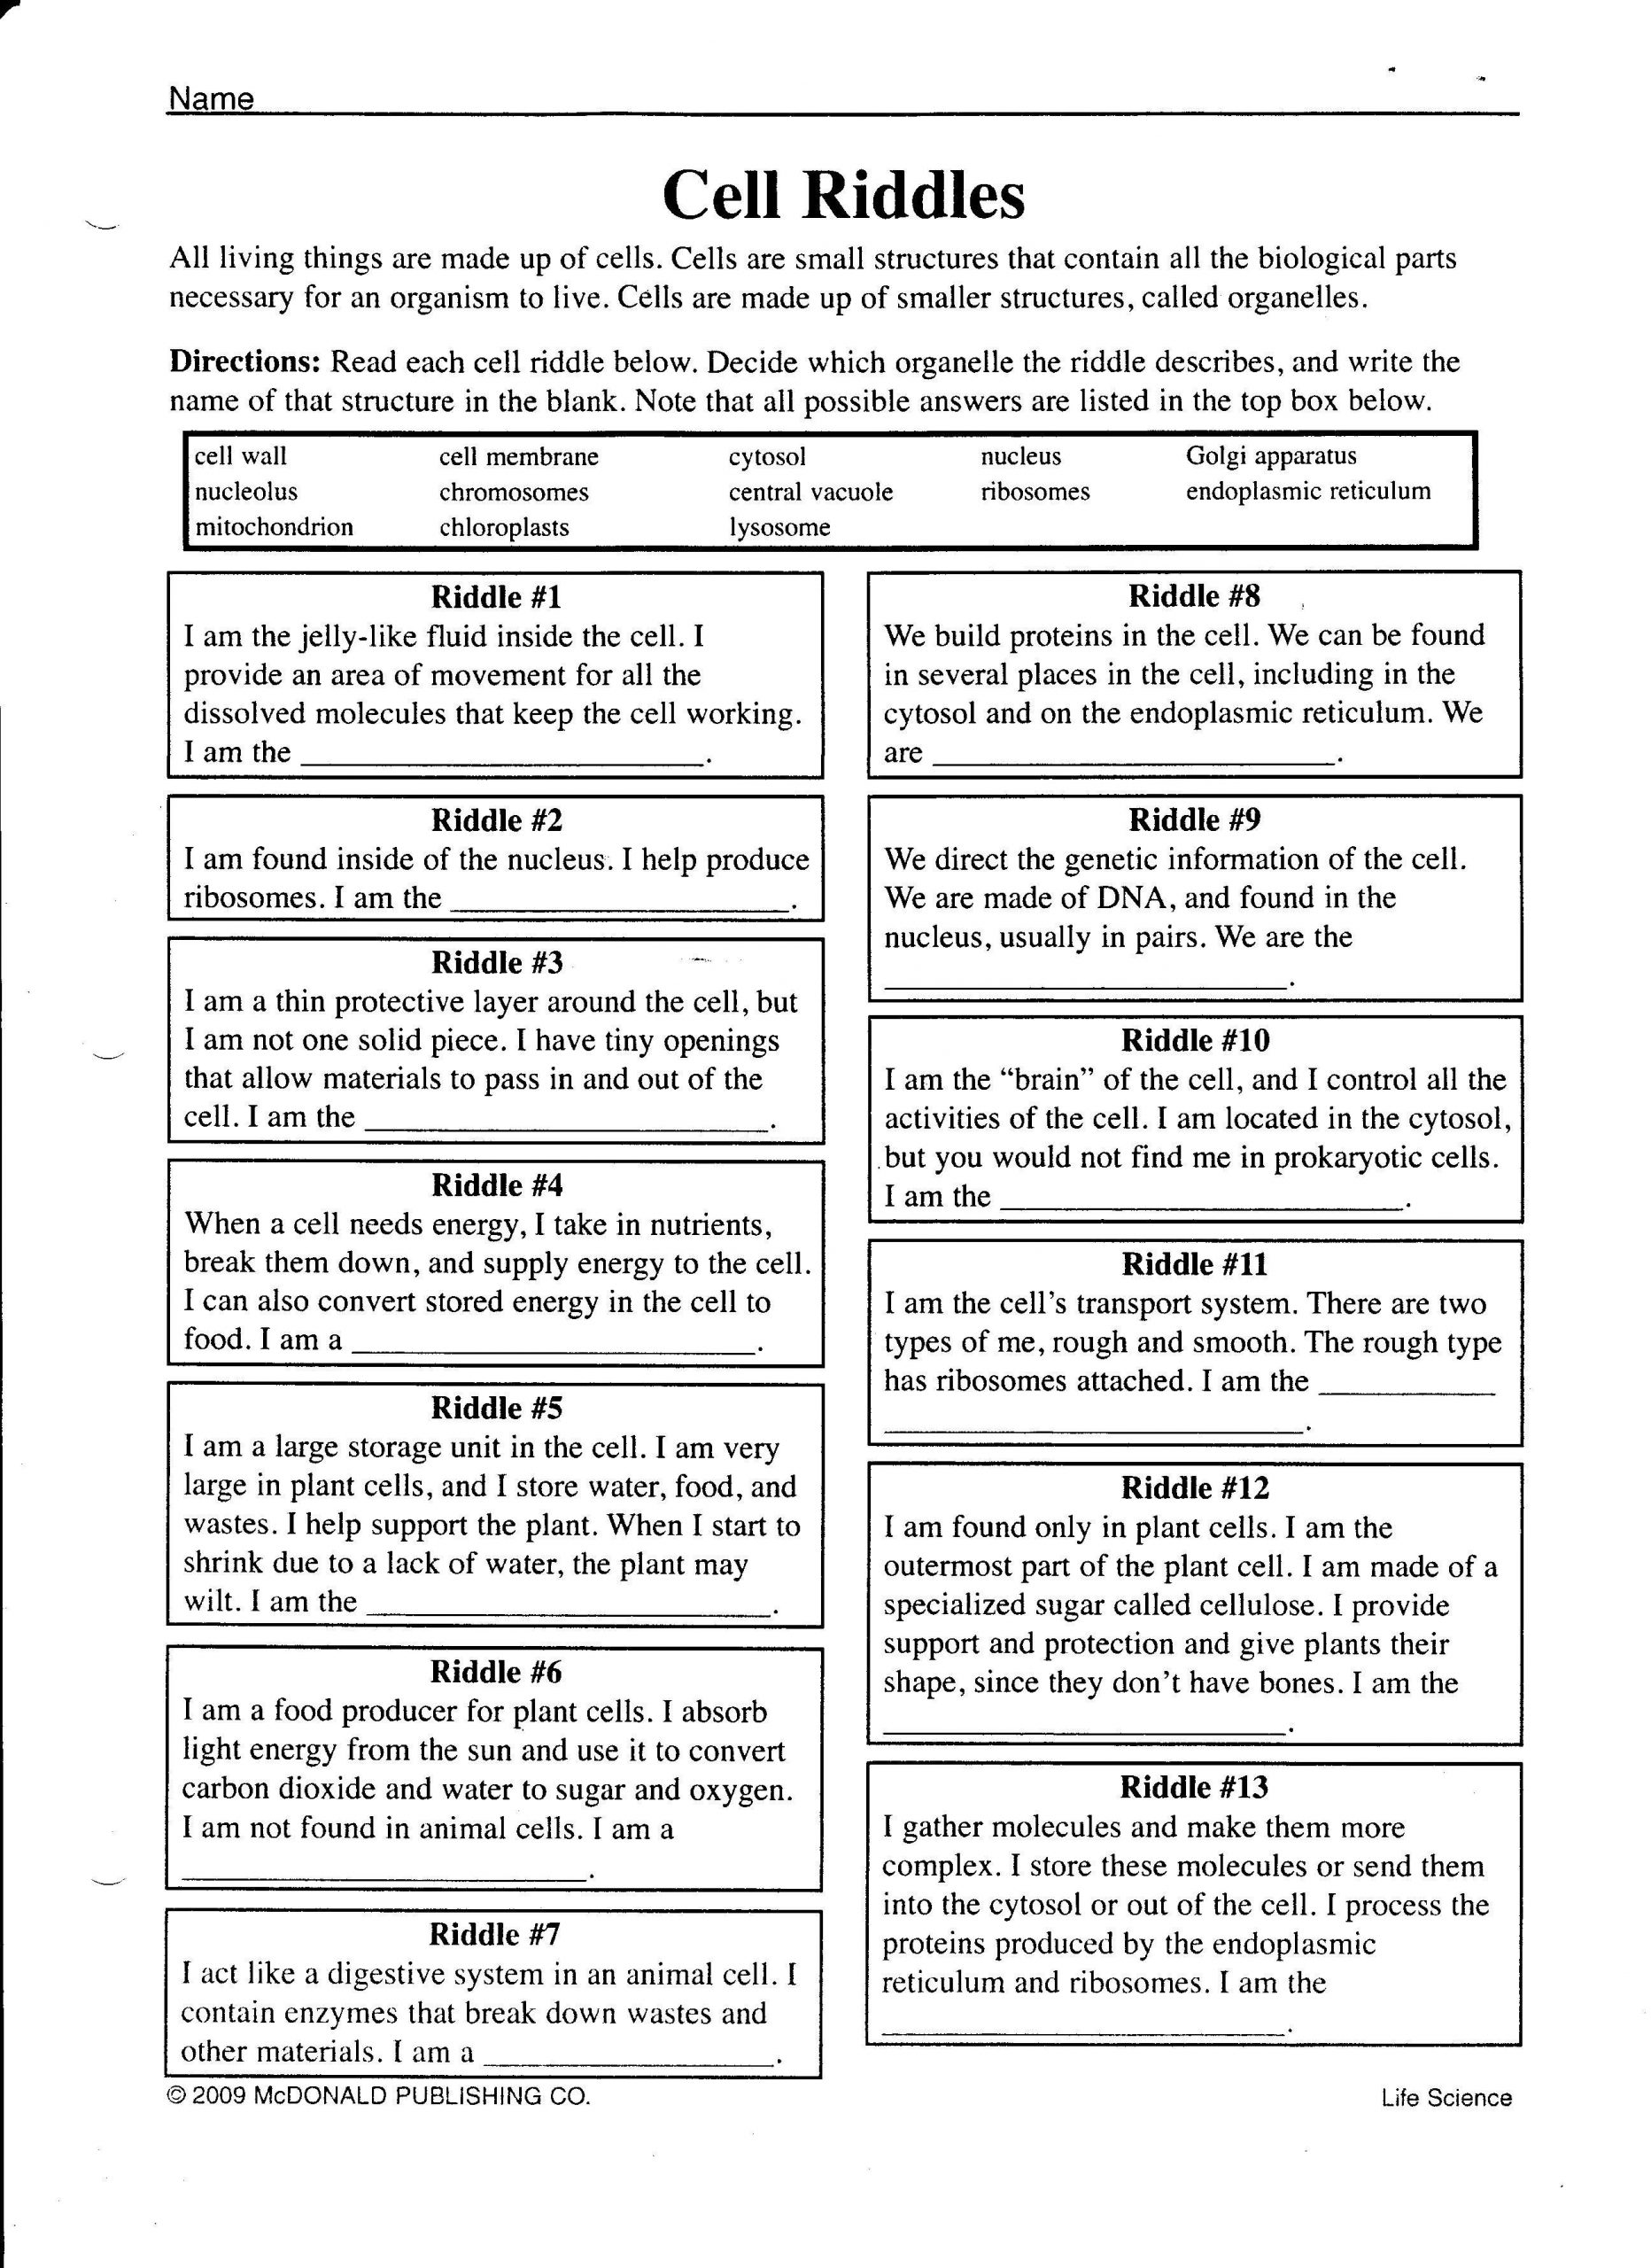 Cell organelles Worksheet Answers Pin by Kristy Templar On Genetics Lessons In 2020